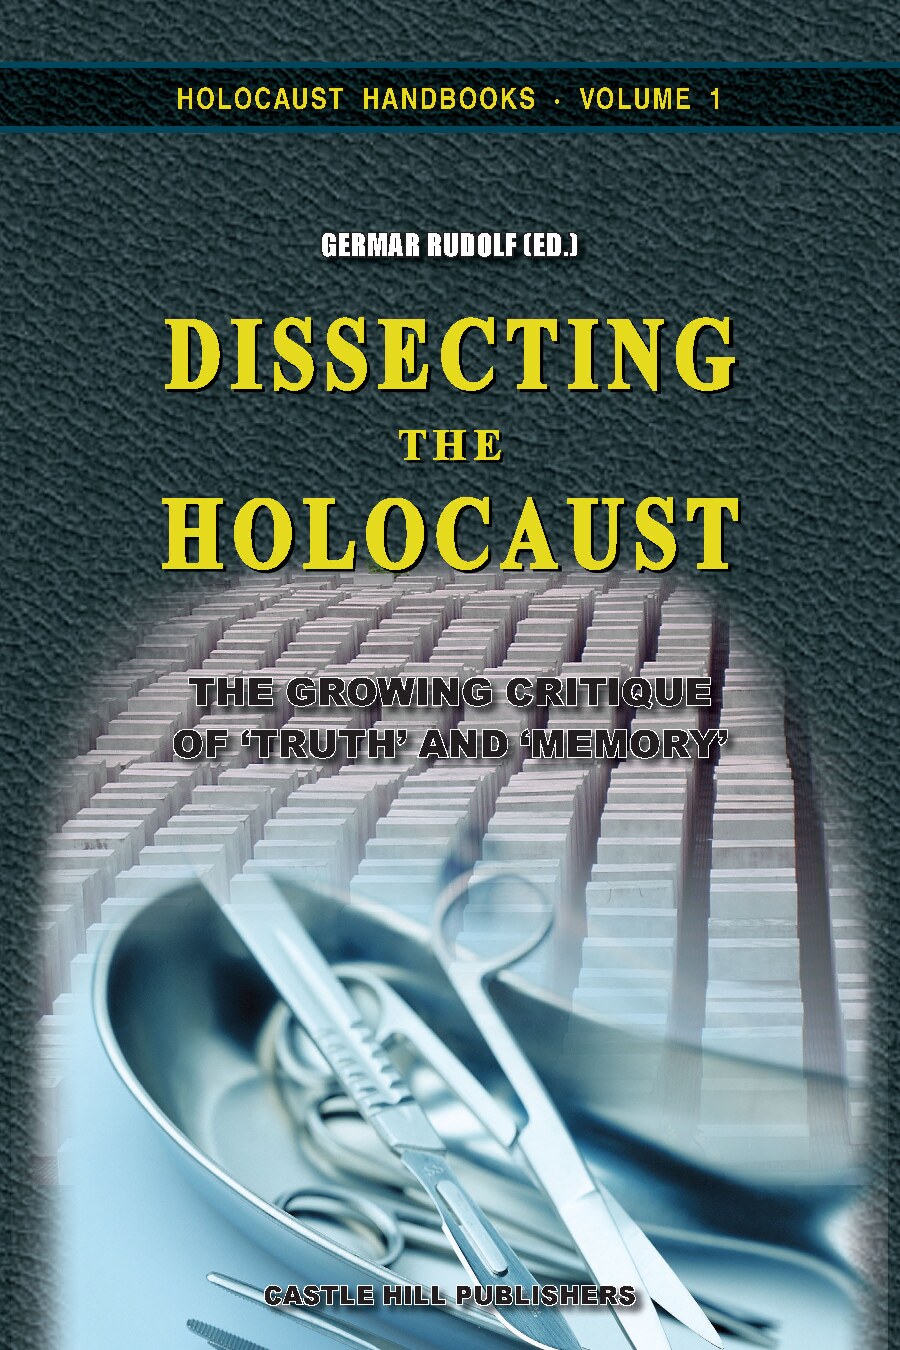 Dissecting the Holocaust: The Growing Critique of “Truth” and “Memory”